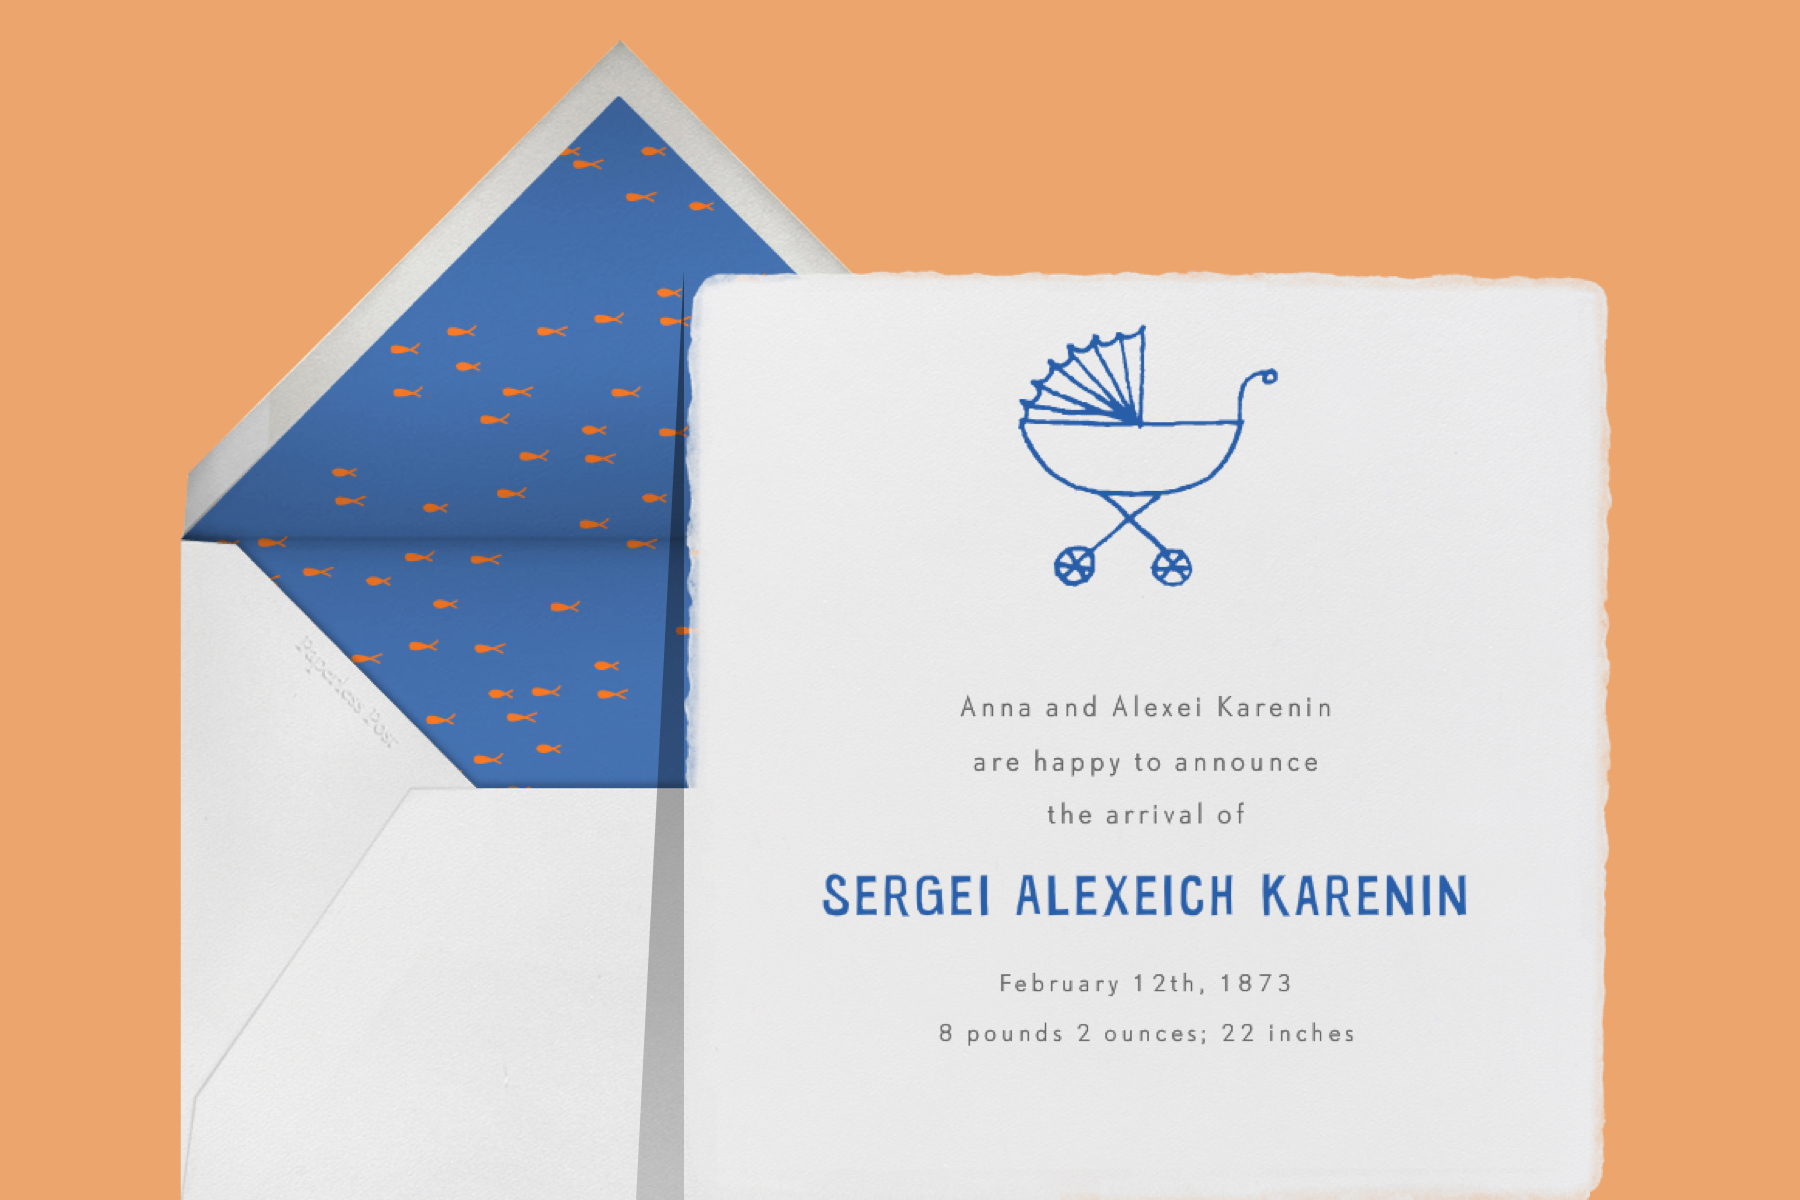 “Deckle - Ivory Square” invitation by Paperless Post. The square white card features an illustration of a pram. The card appears on an orange background.